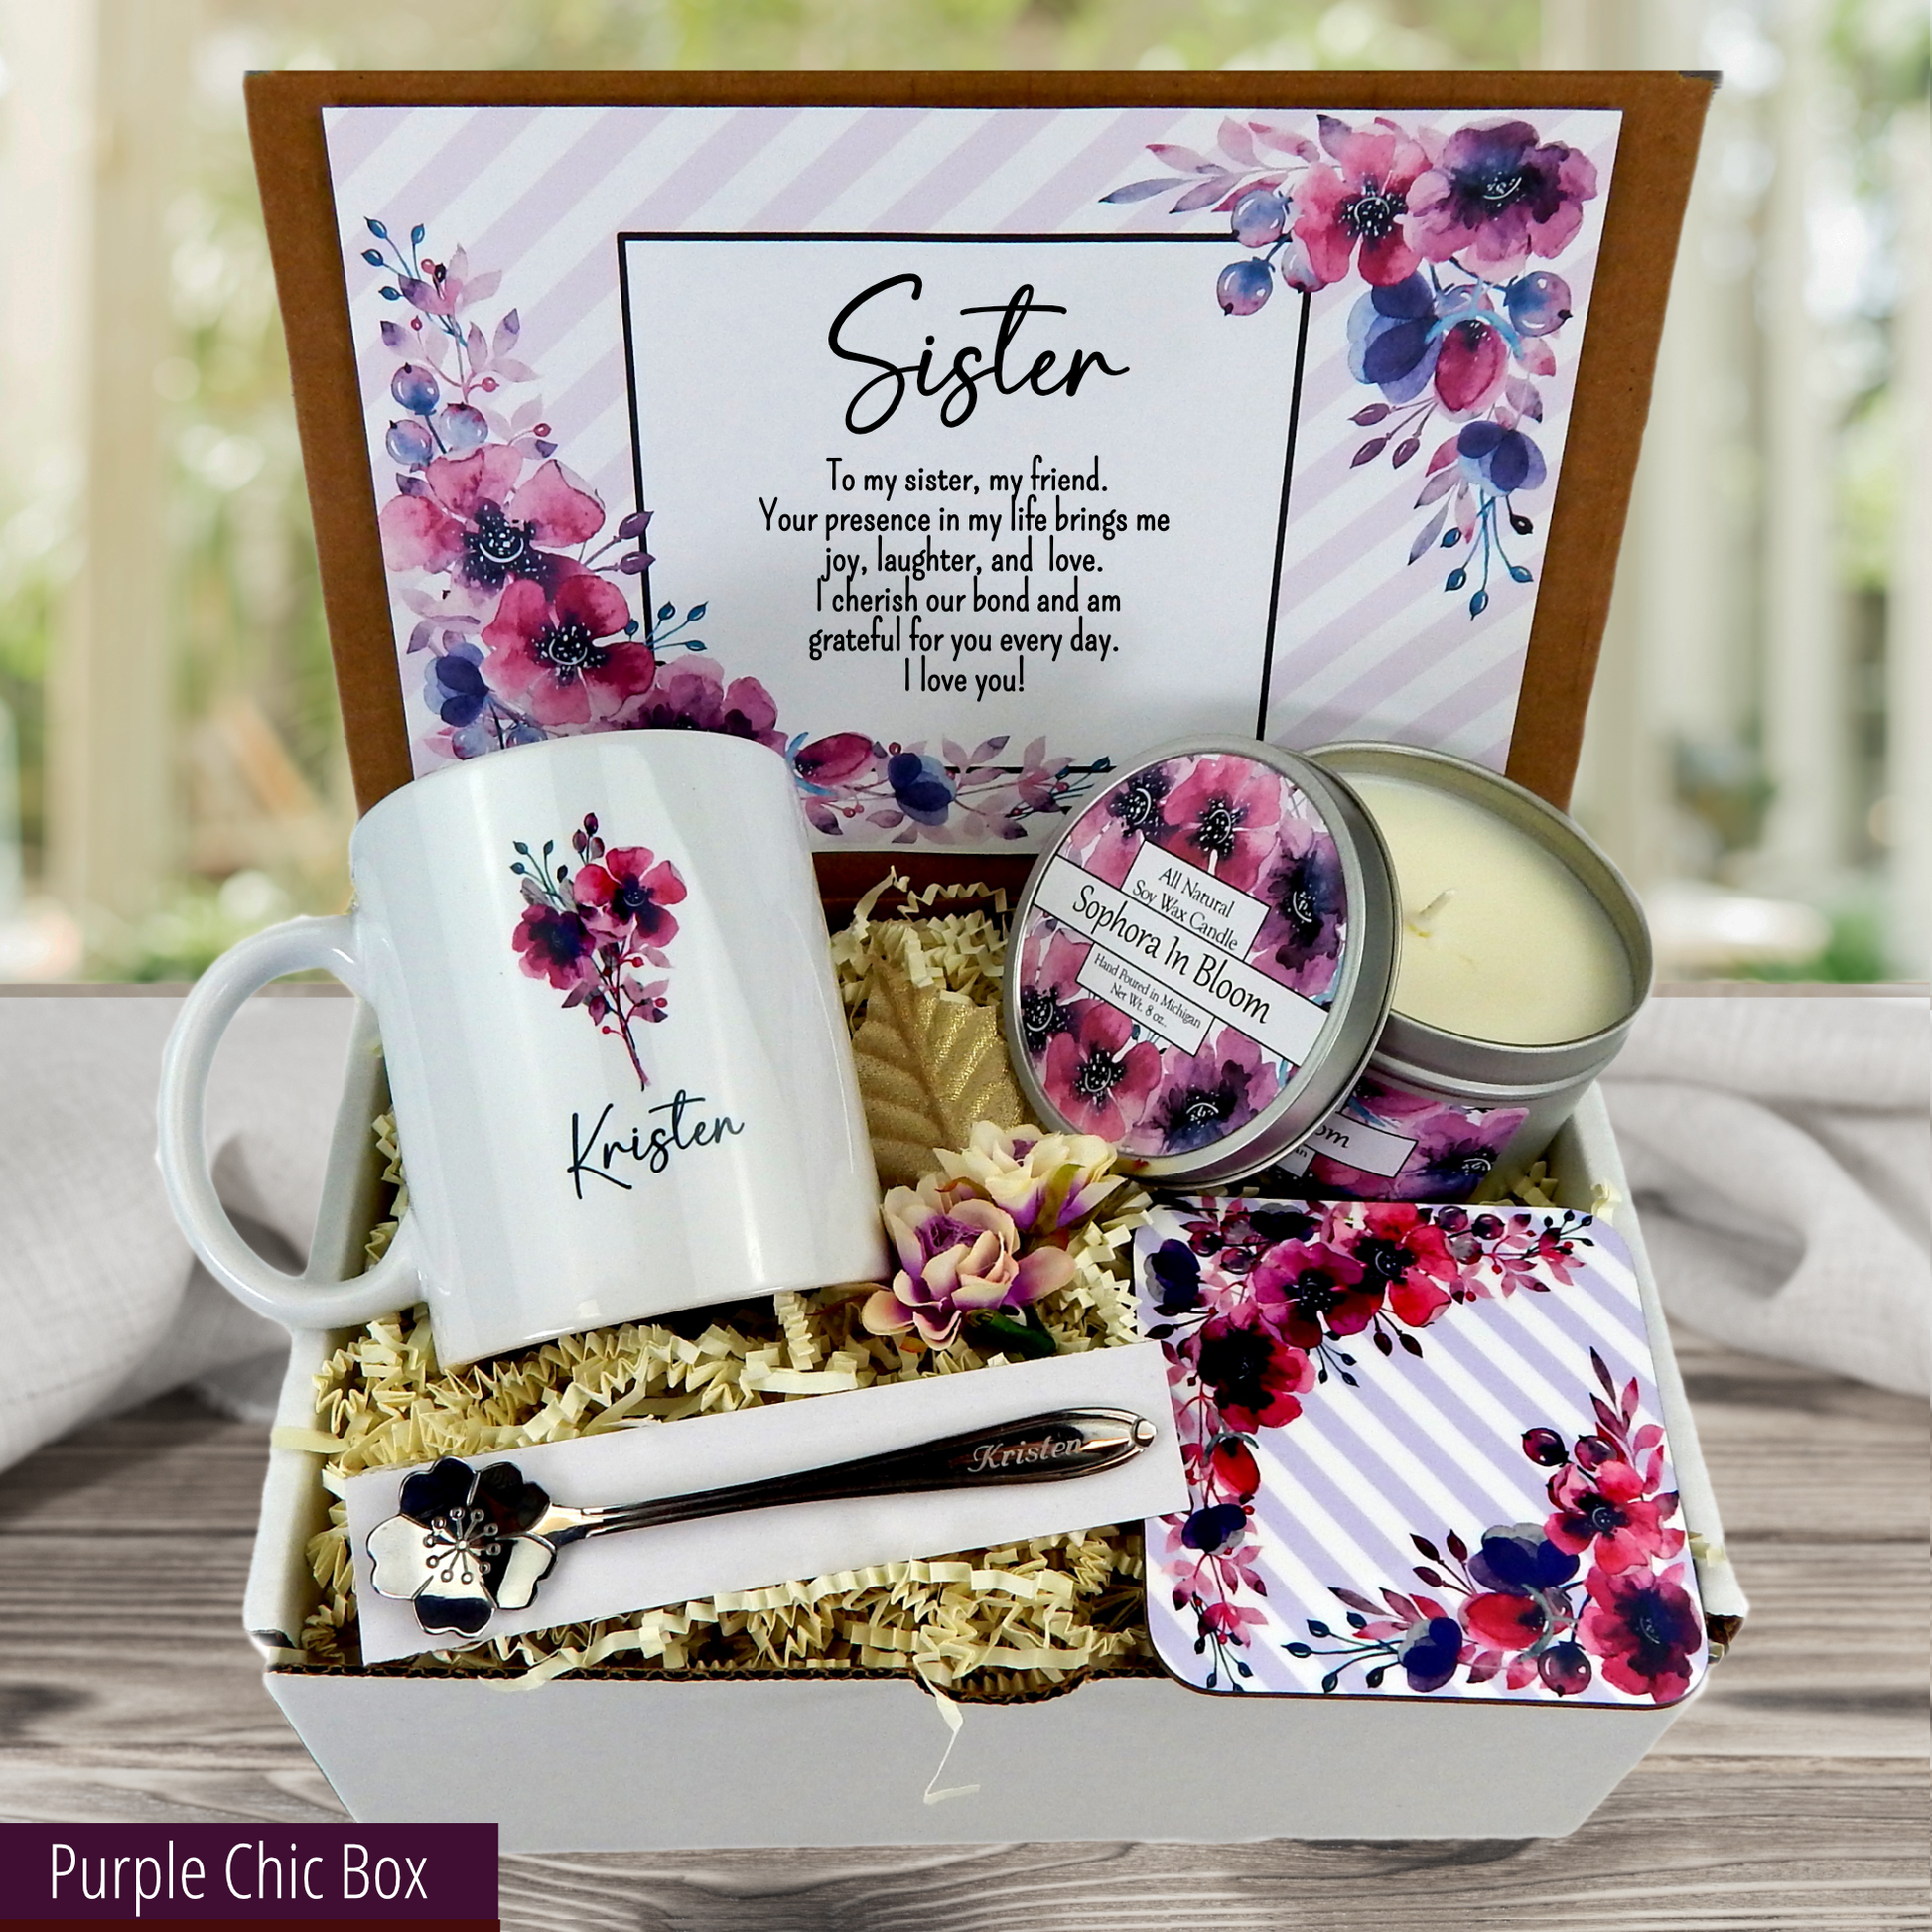 Purple theme Sister's birthday delight: personalized mug, engraved spoon, coaster, candle, and heartfelt message.